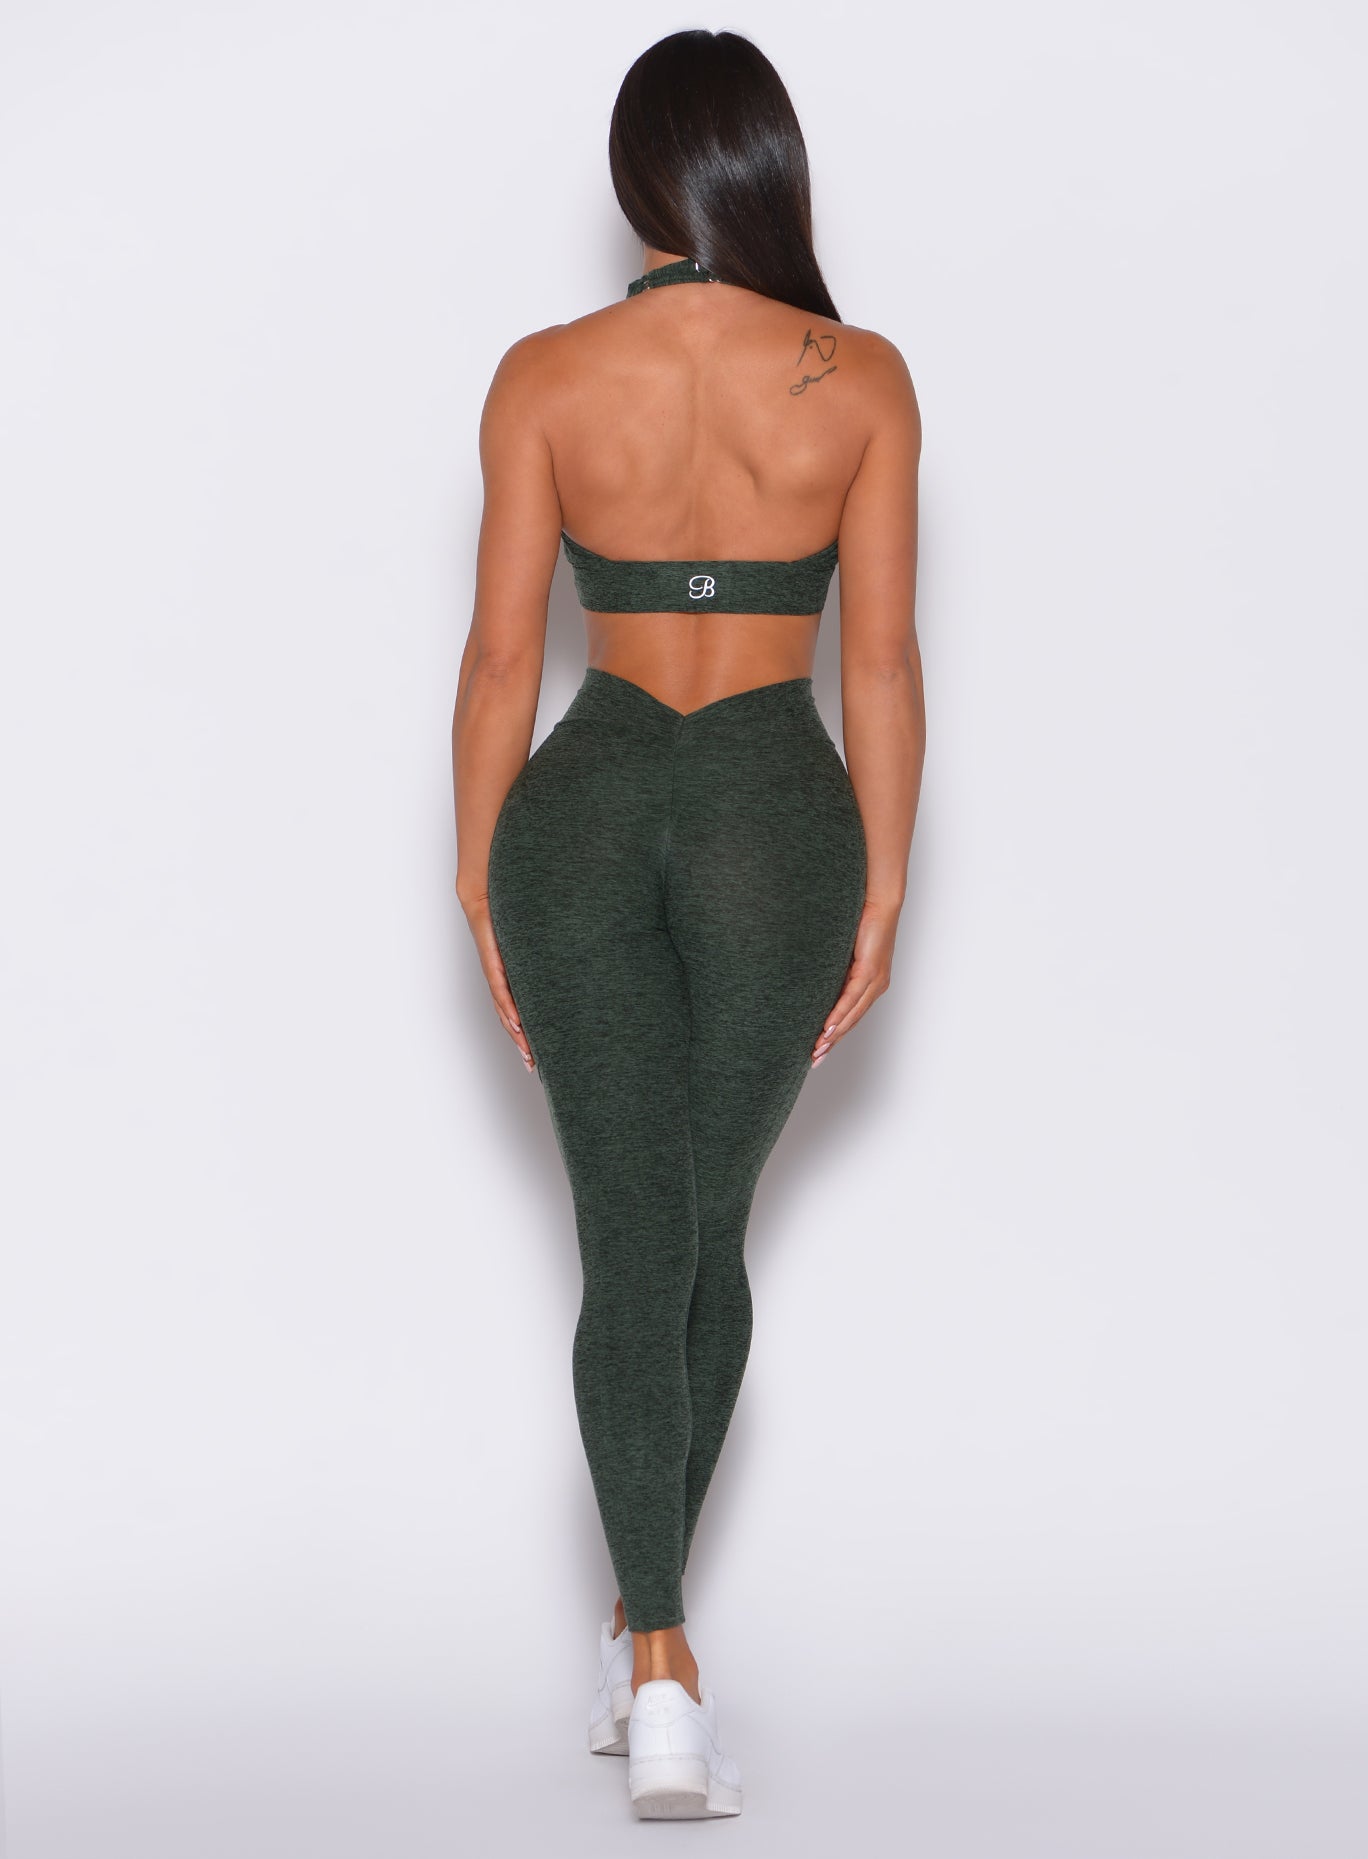 Back profile view of a model in our V Back Leggings in hunter green color along with the matching bra